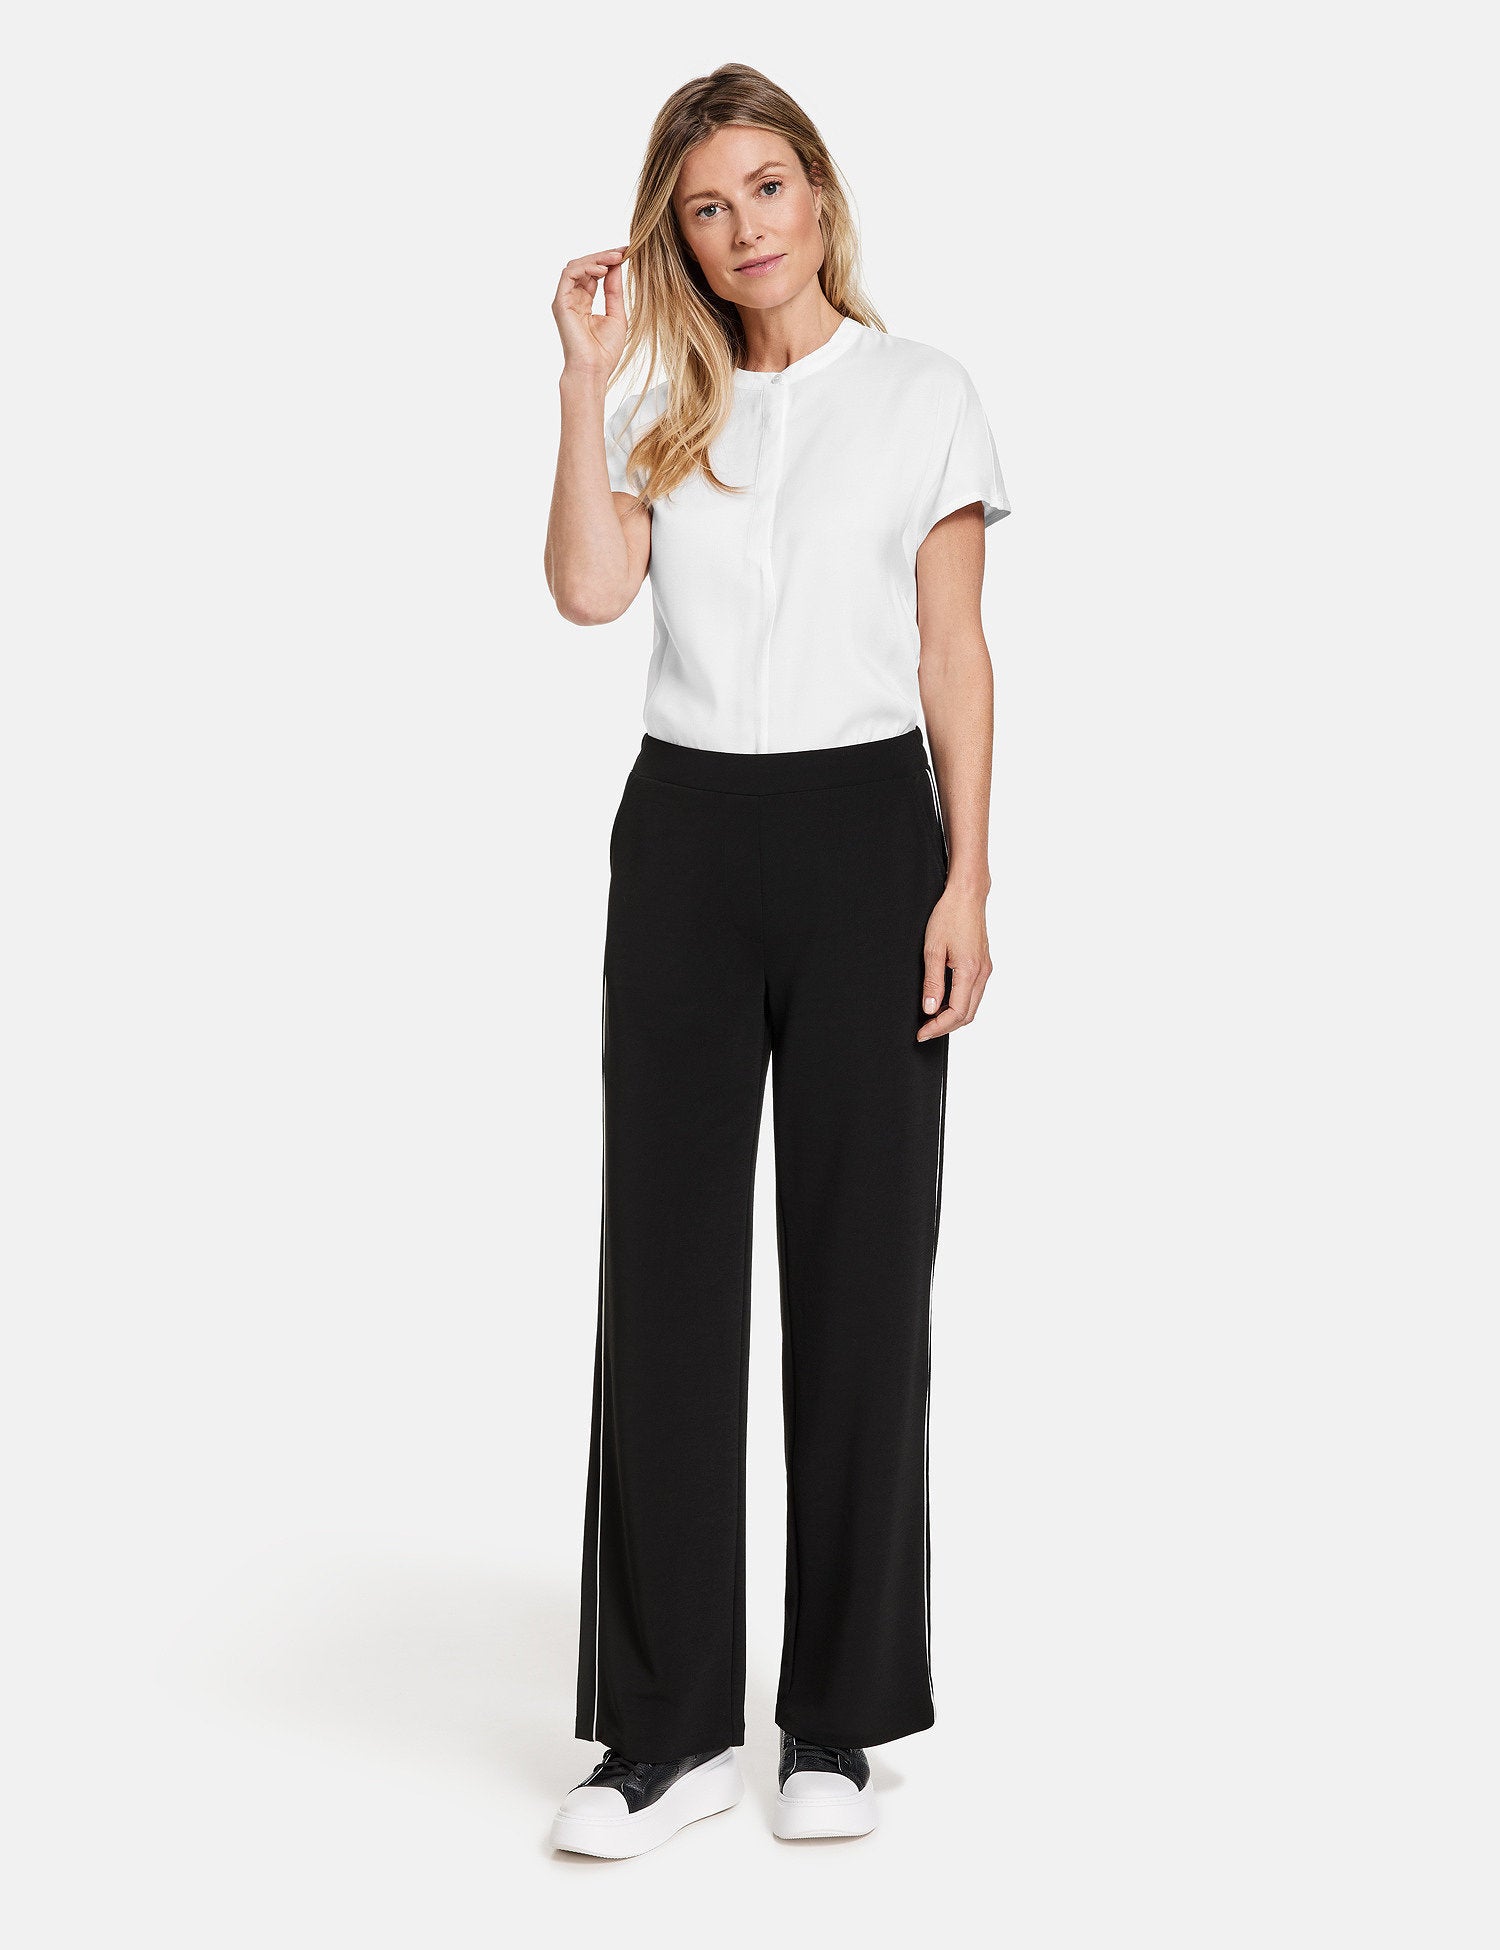 Slip-On Trousers With Side Piping_925009-35031_11000_07